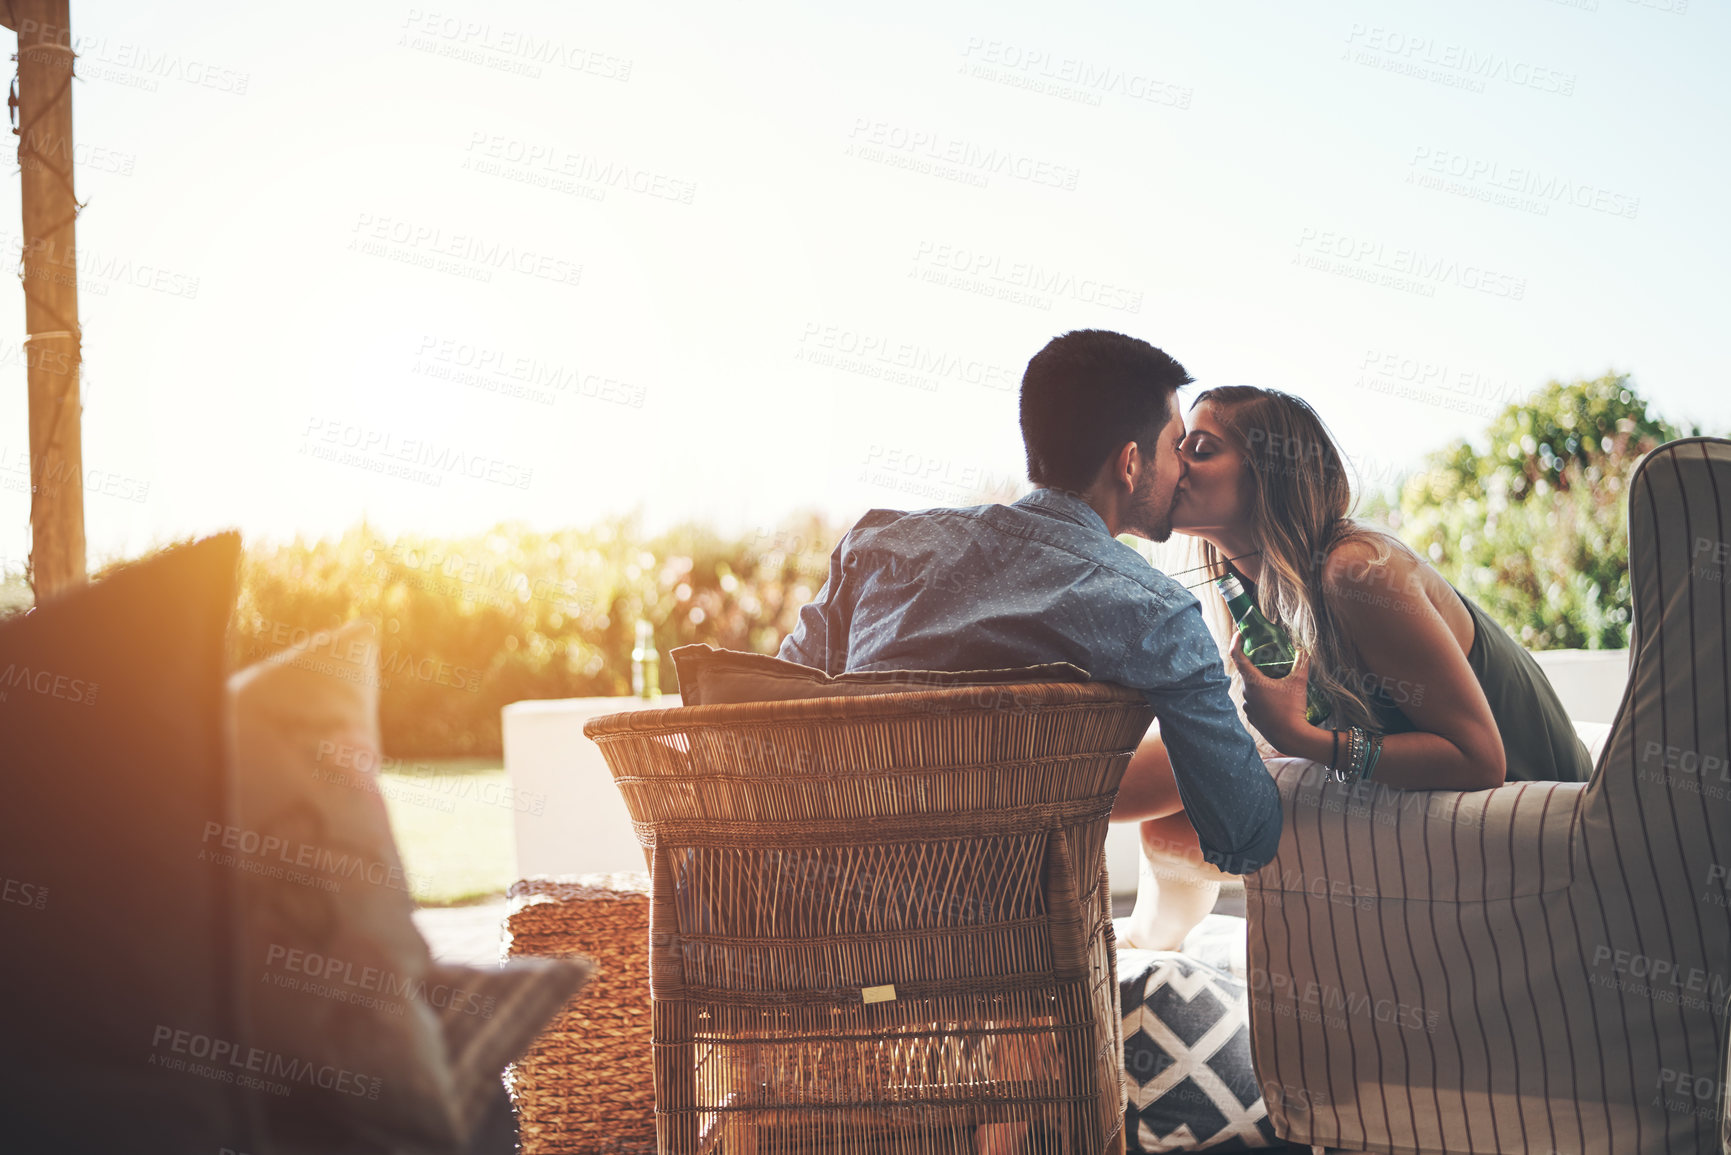 Buy stock photo Rearview shot of an affectionate young couple kissing while enjoying some beers on their patio